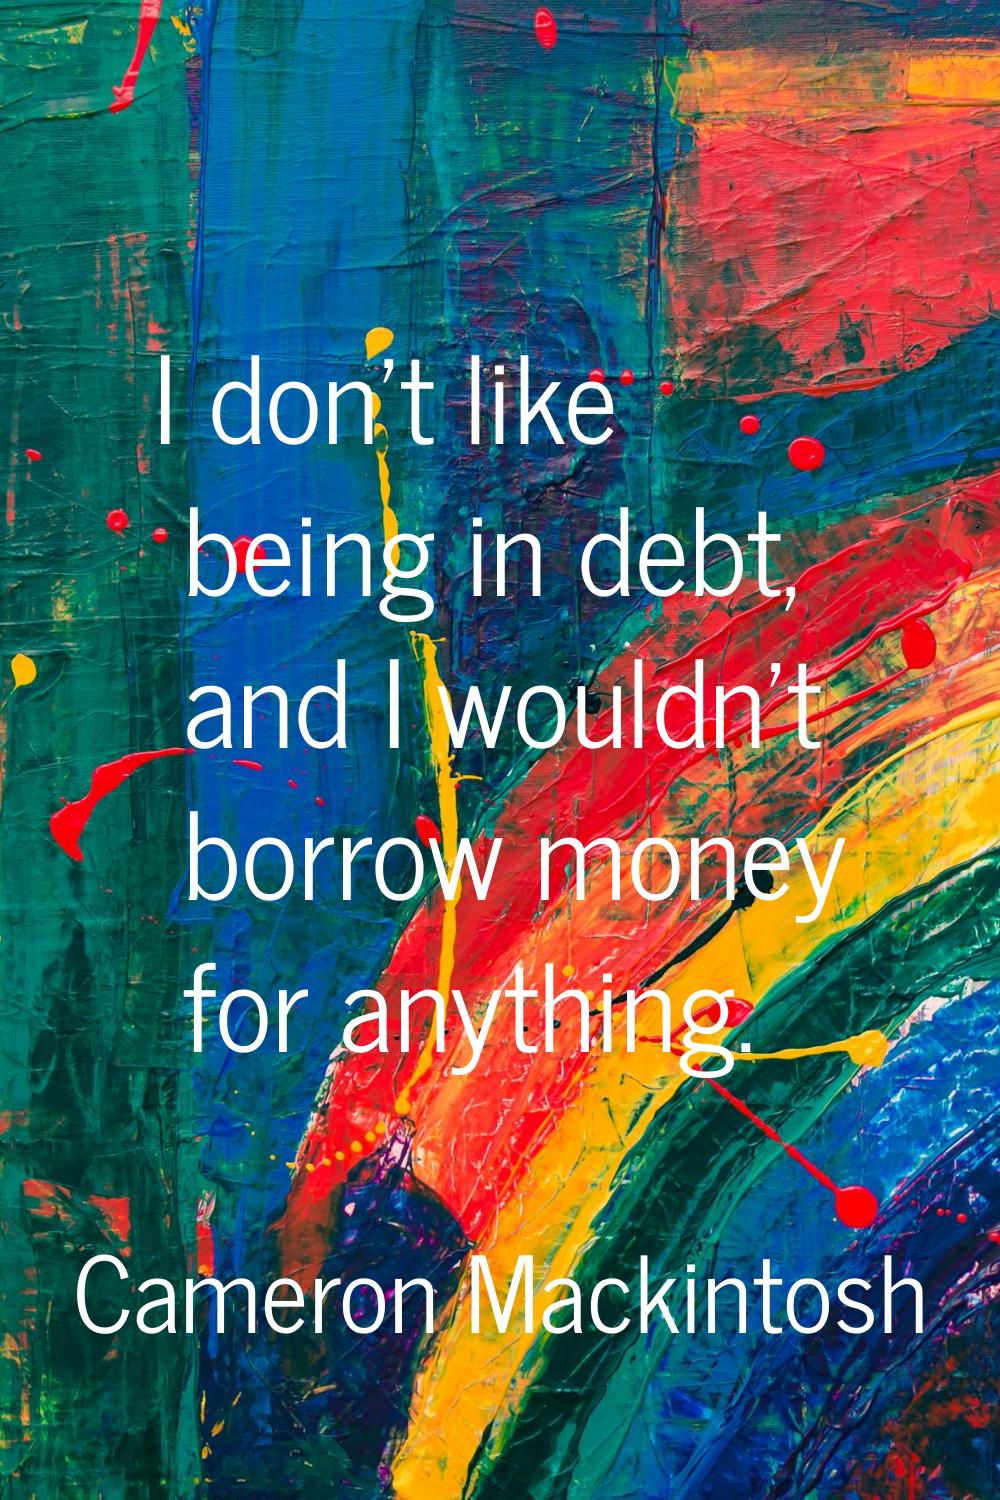 I don't like being in debt, and I wouldn't borrow money for anything.